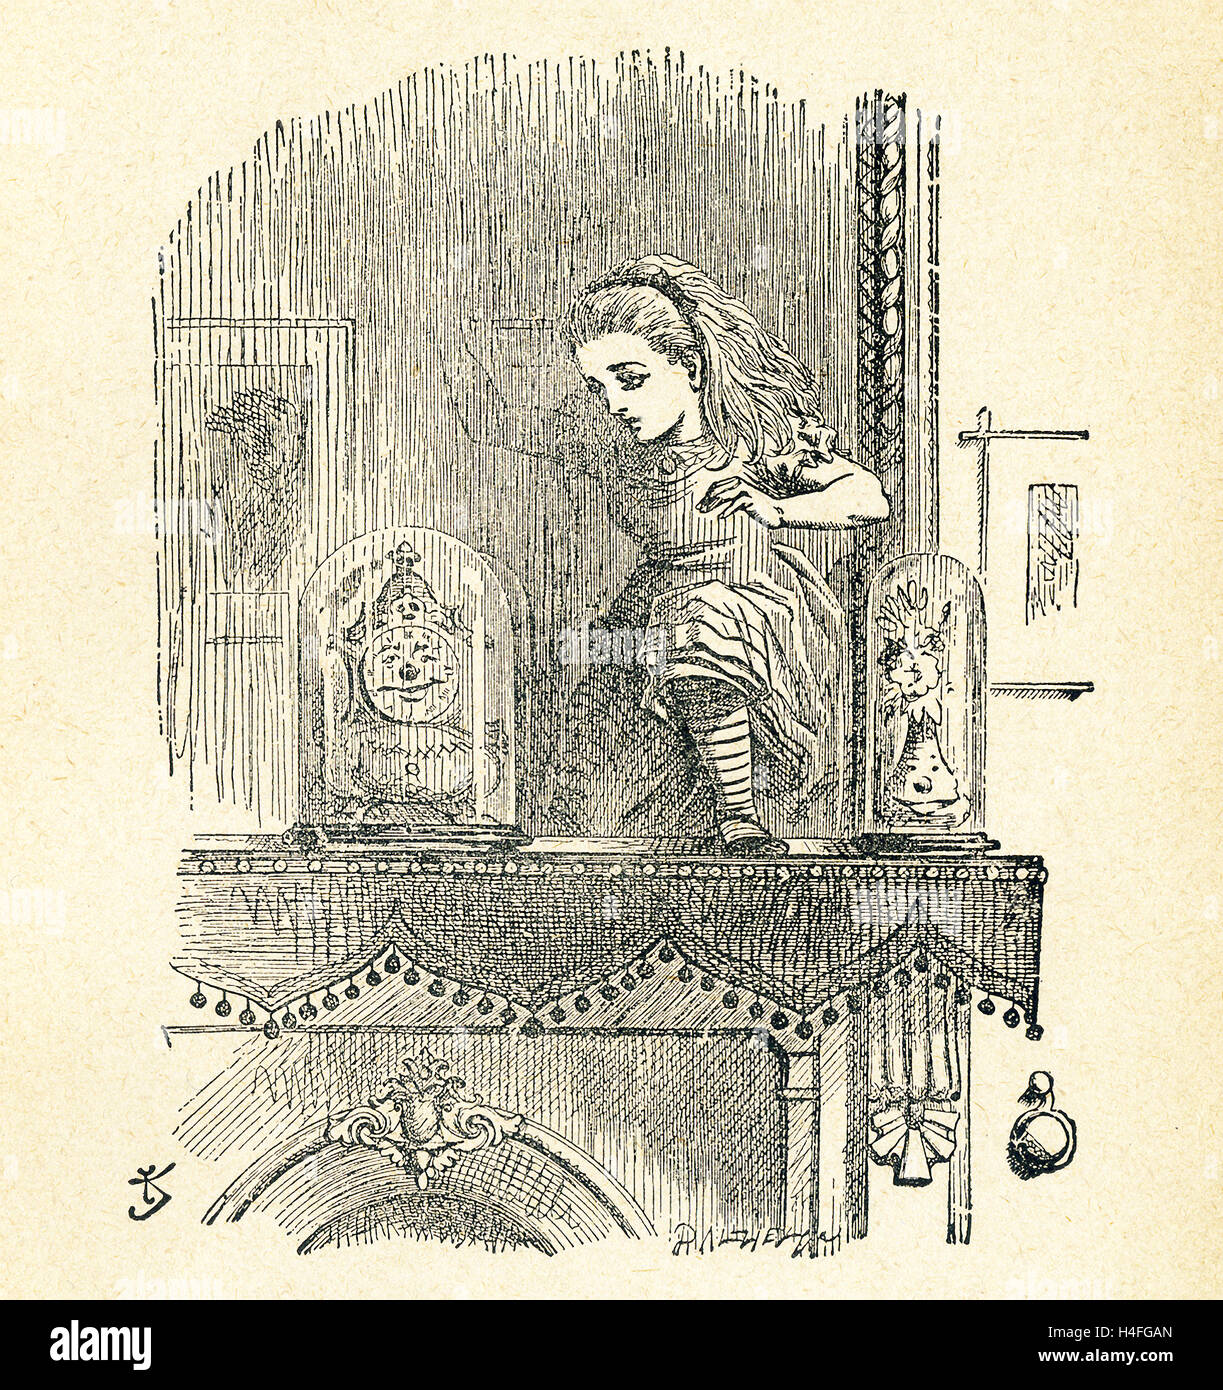 This illustration of Alice poking the looking glass (mirror) and seeing an old man in the clock , not an actual clock as in the room she just left is from 'Through the This illustration of Alice poking poke the looking glass (mirror) and seeing an old man in the clock, not an actual clock as in the room she just left is from 'Through the Looking-Glass and What Alice Found There' by Lewis Carroll (Charles Lutwidge Dodgson), who wrote this novel in 1871 as a sequel to 'Alice's Adventures in Wonderland.' Alice has now stepped through the mantle mirror into another world. Stock Photo